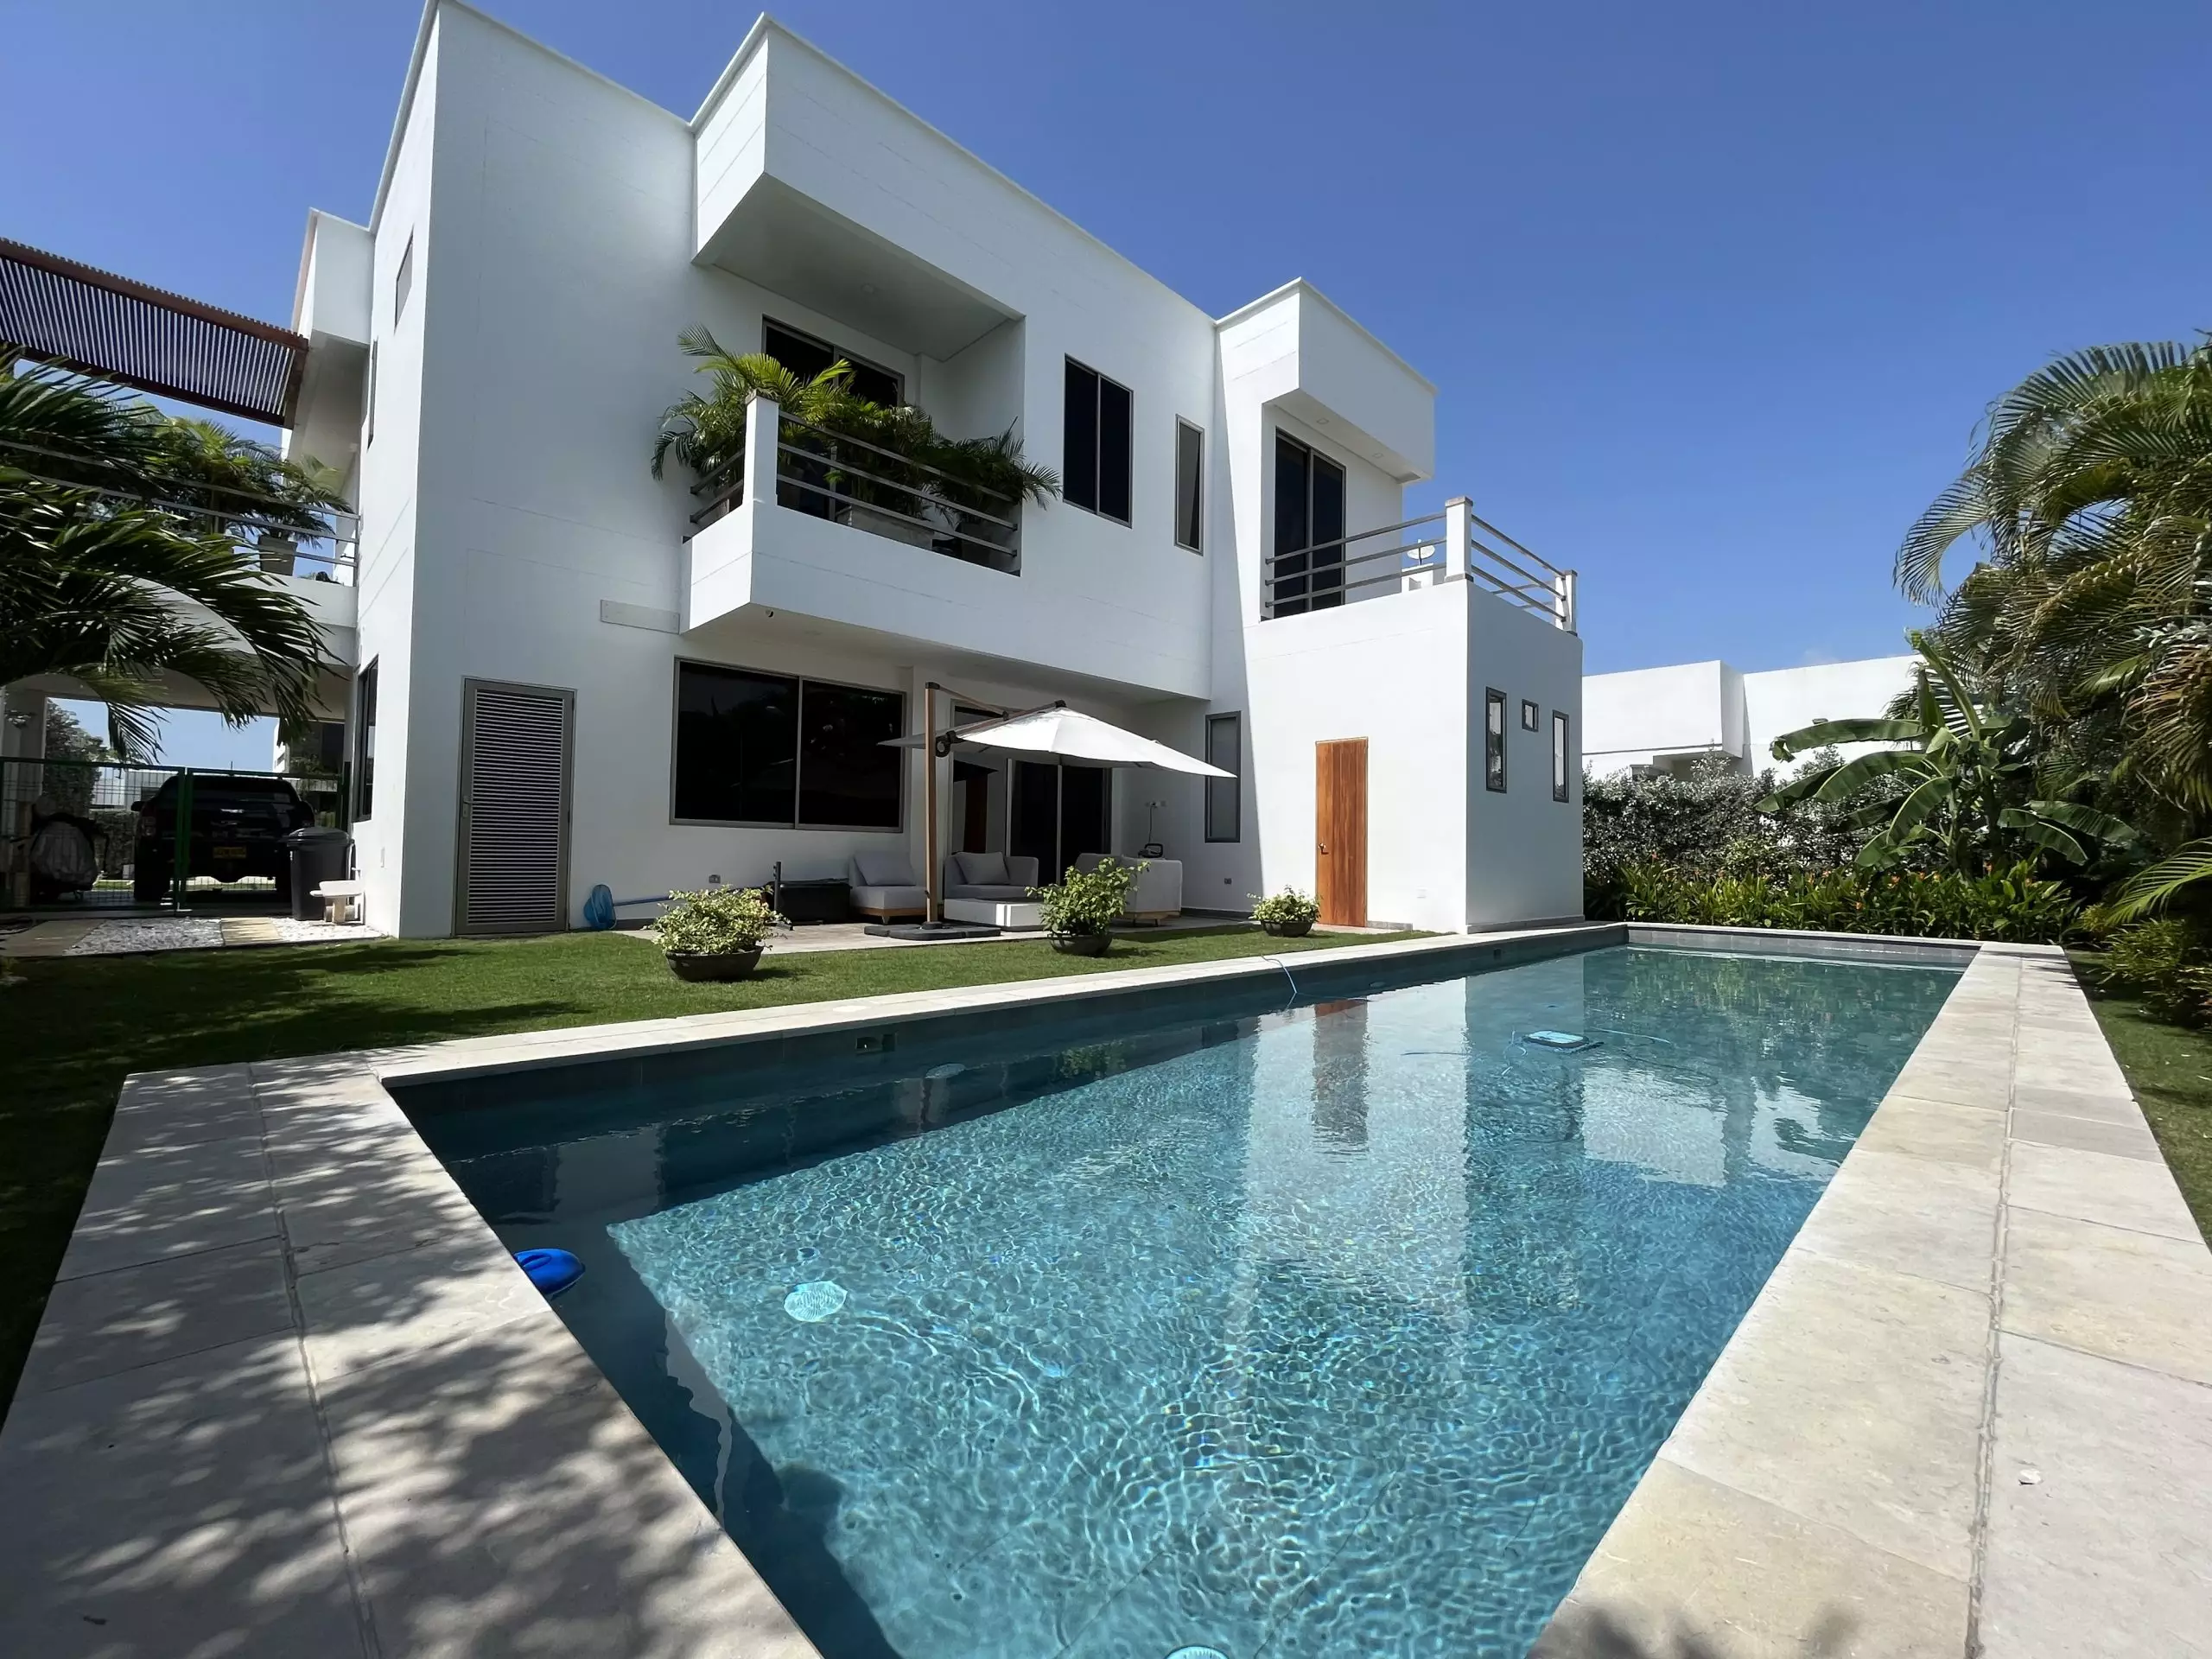 Luxury Home in one of the most prestigious gated communities in Cartagena Colombia called Barcelona de Indias.